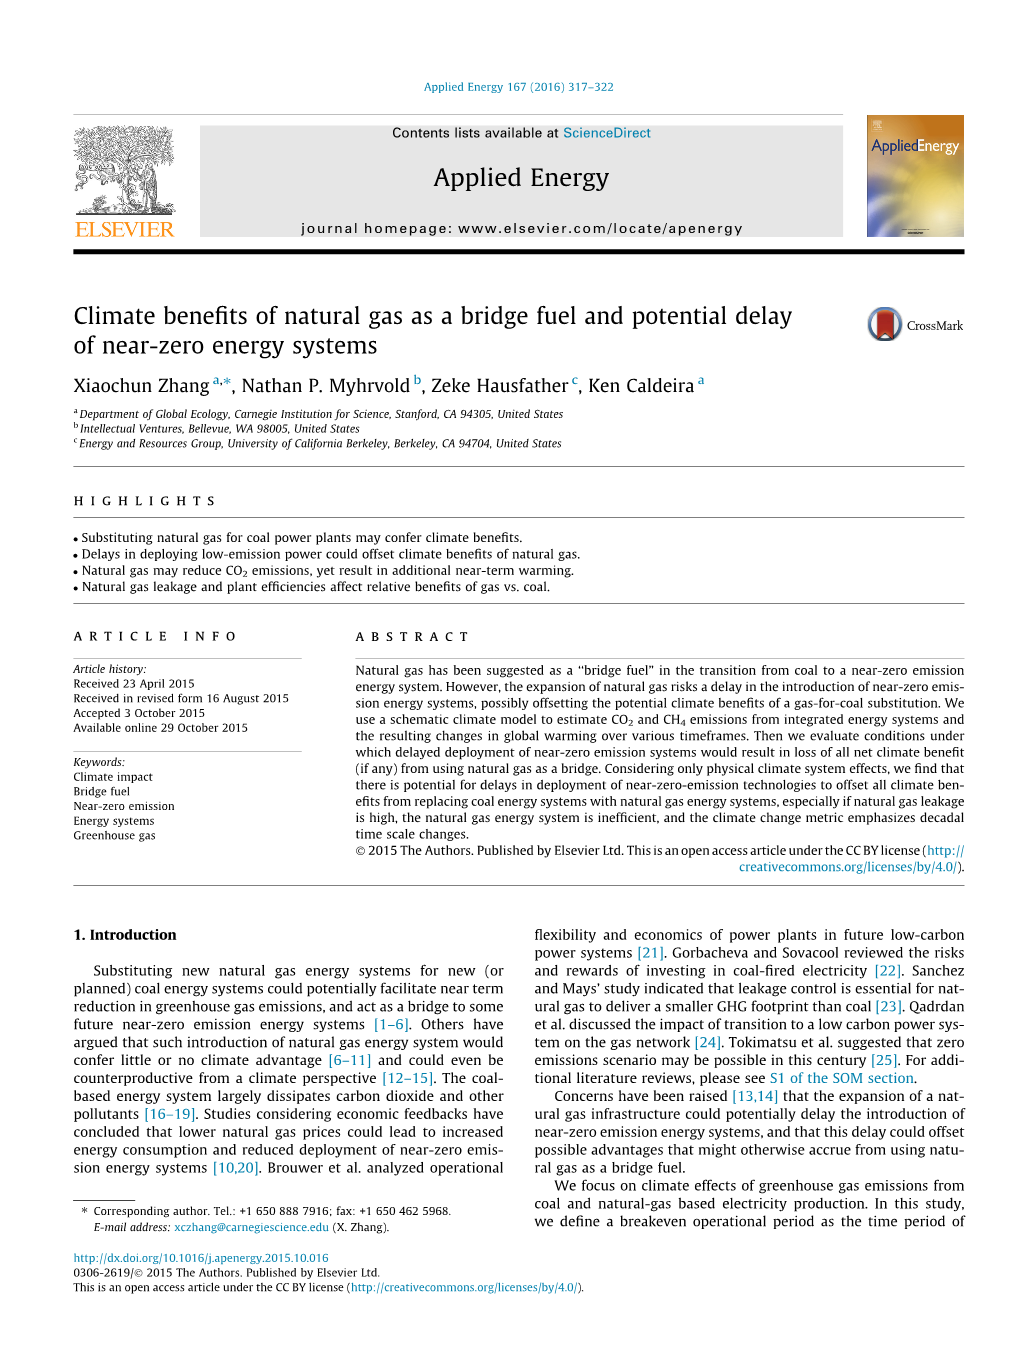 Climate Benefits of Natural Gas As a Bridge Fuel and Potential Delay Of